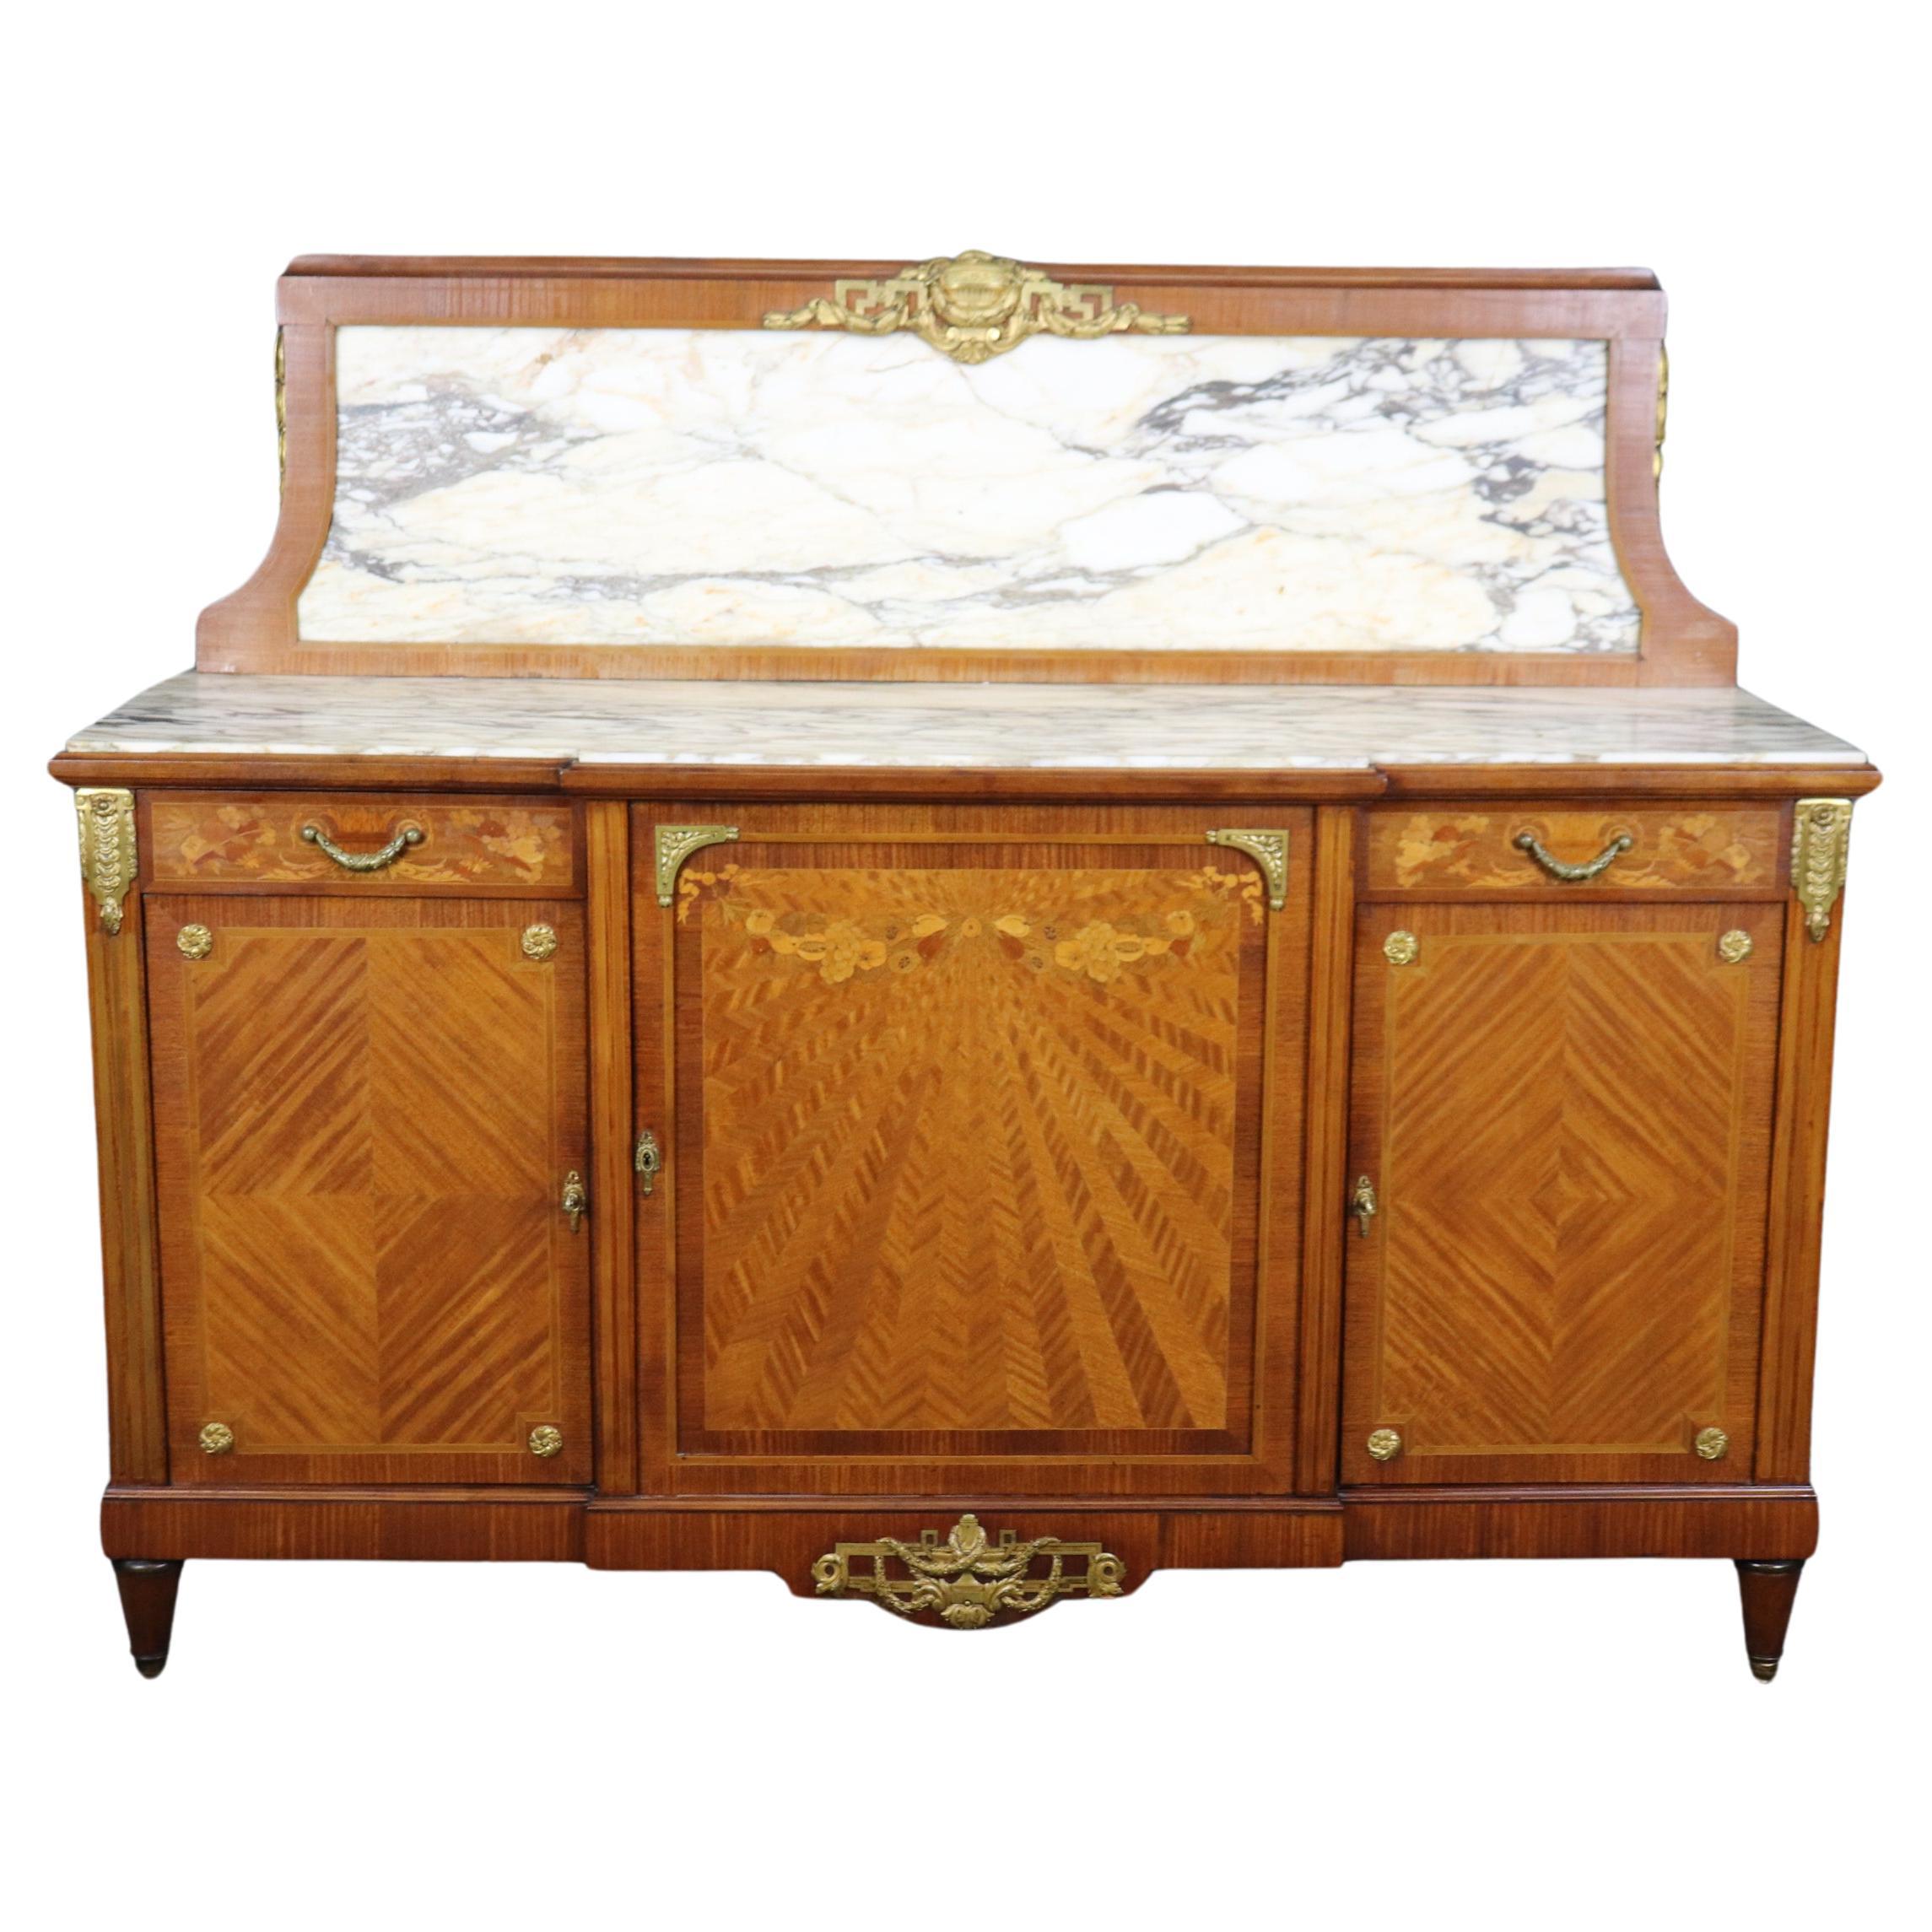 Fine Quality Restored Bronze Ormolu Mounted French Art Nouveau Sideboard  For Sale